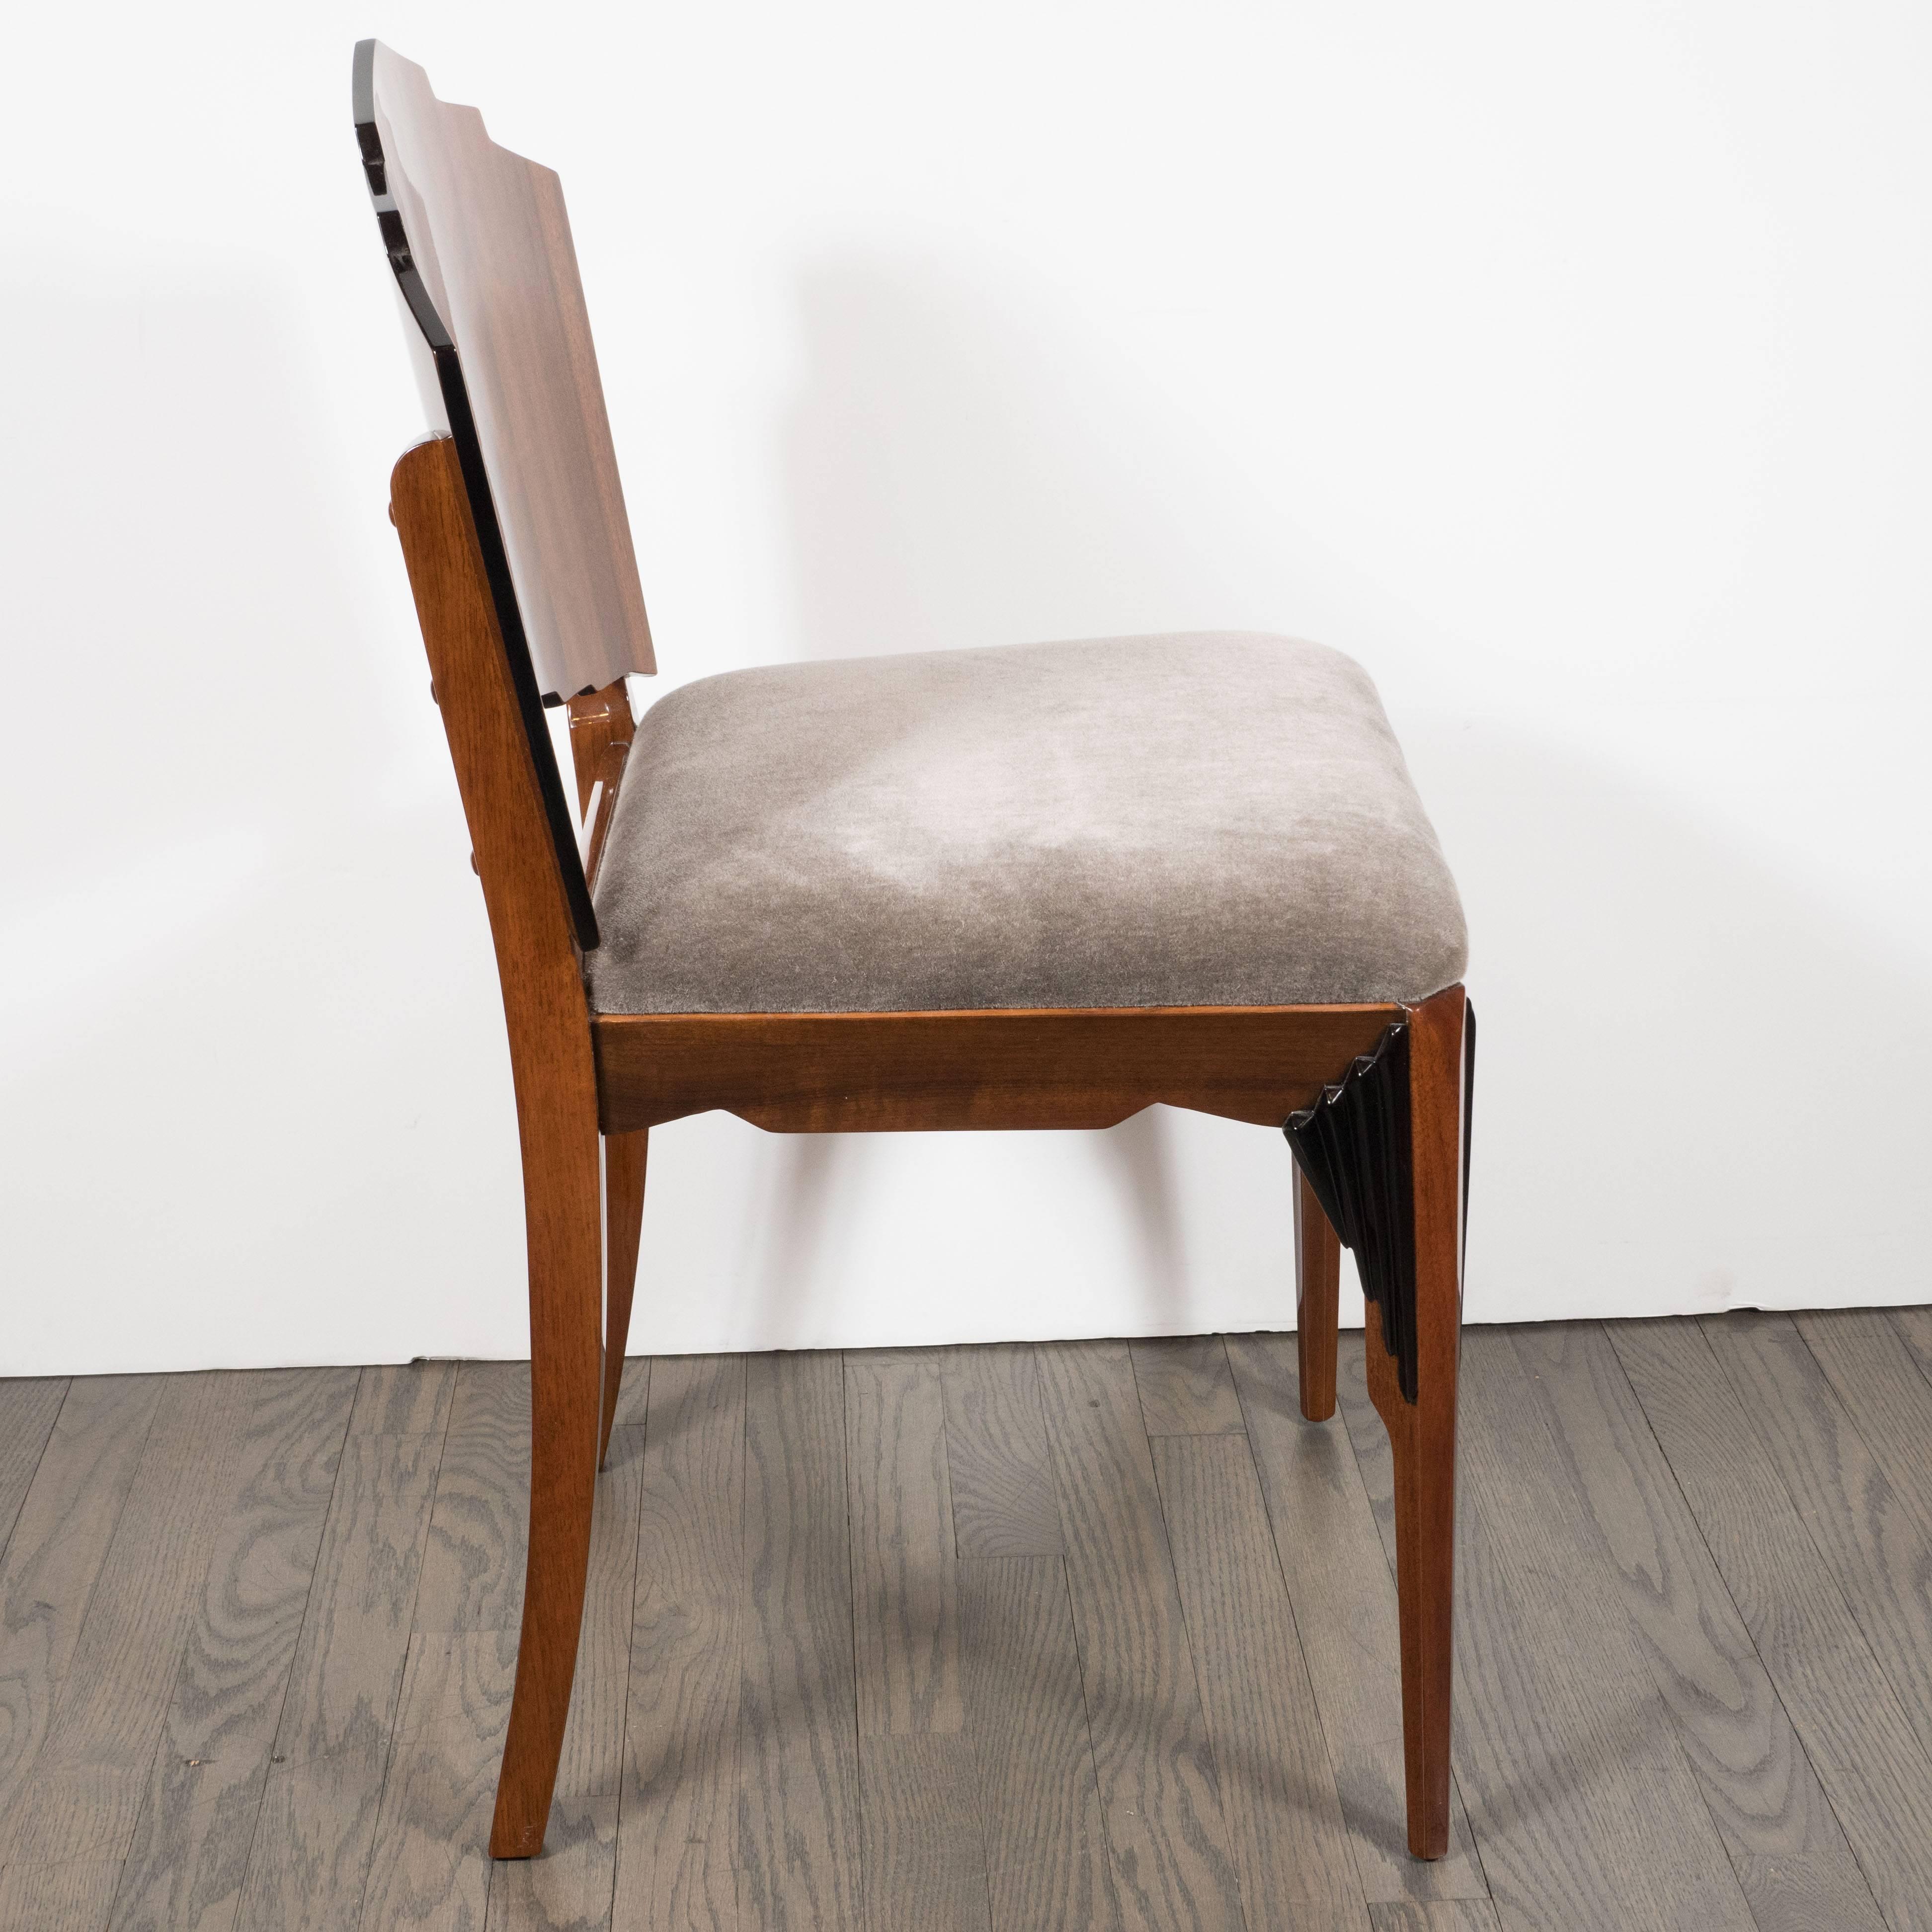 American Art Deco Skyscraper Vanity/ Desk Chair in Bookmatched Walnut and Black Lacquer